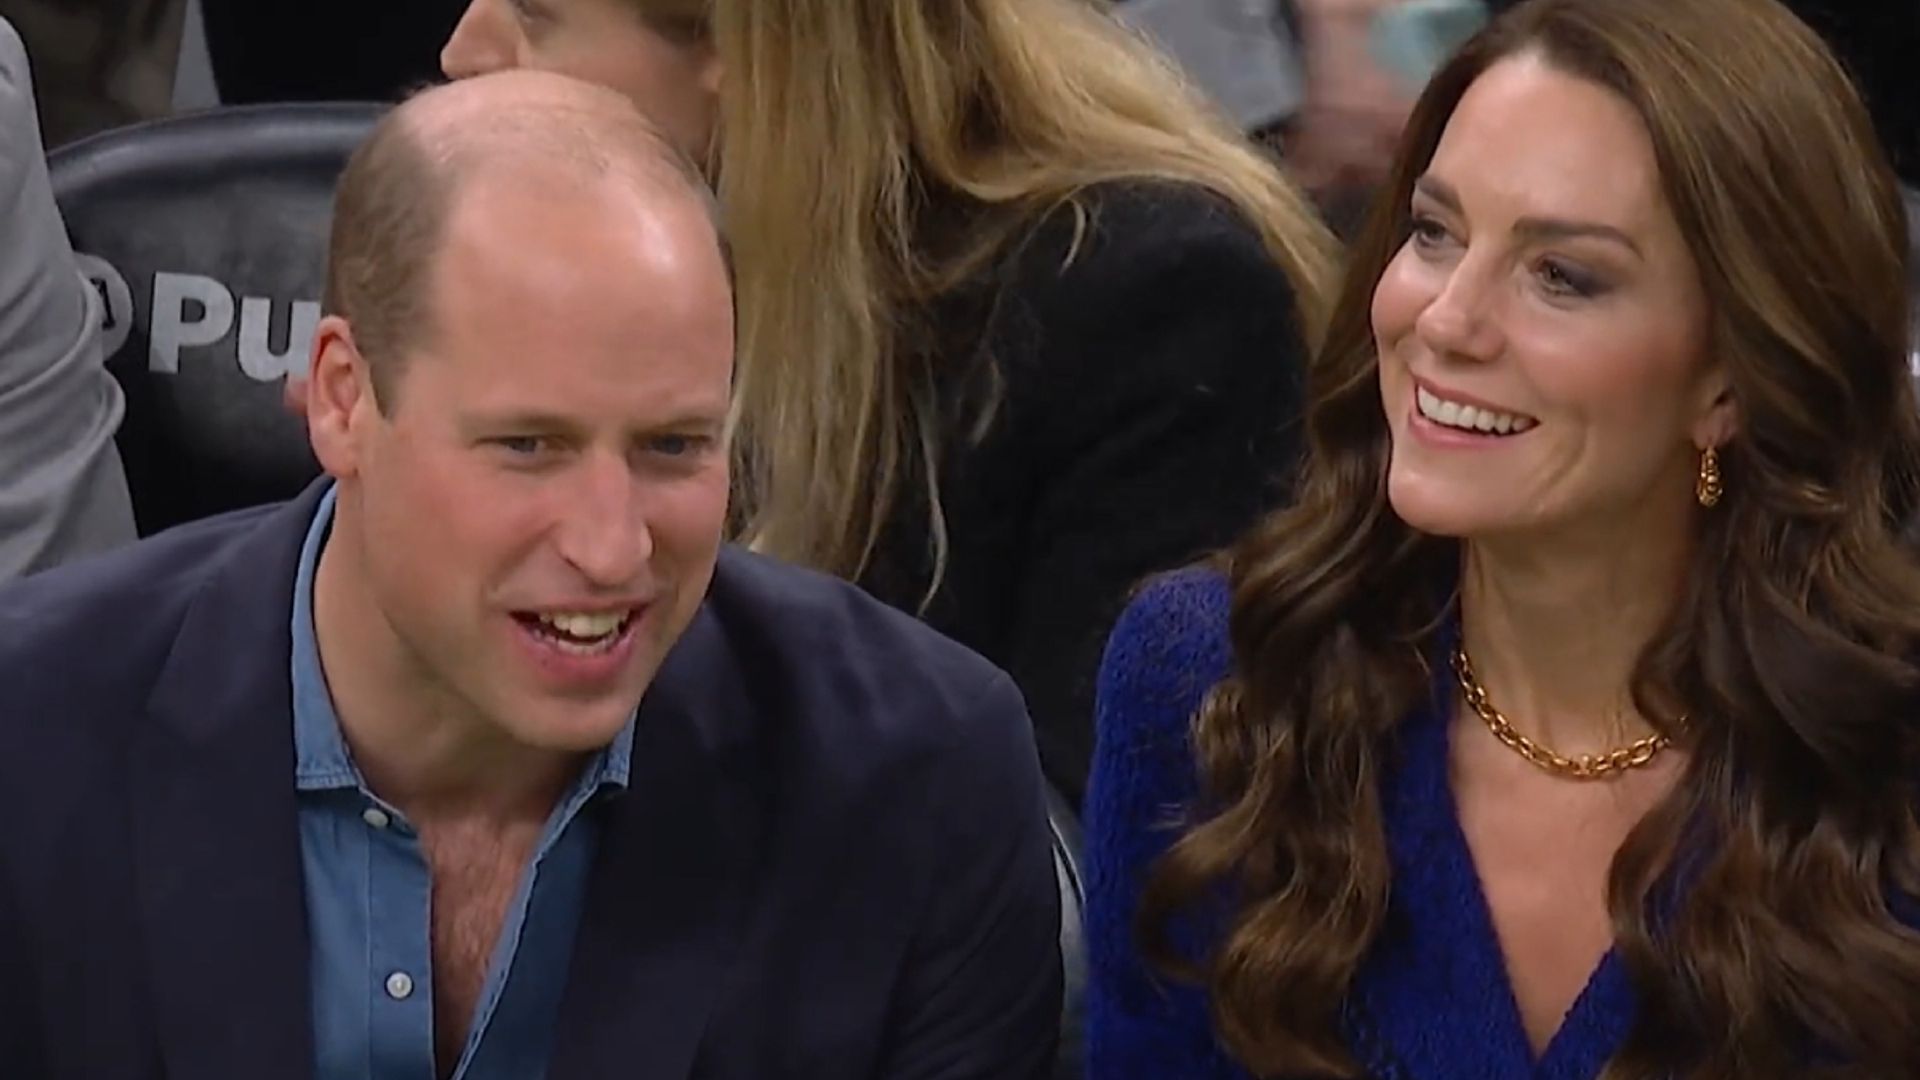 Prince William and Kate Middleton surprise crowds at Boston NBA game